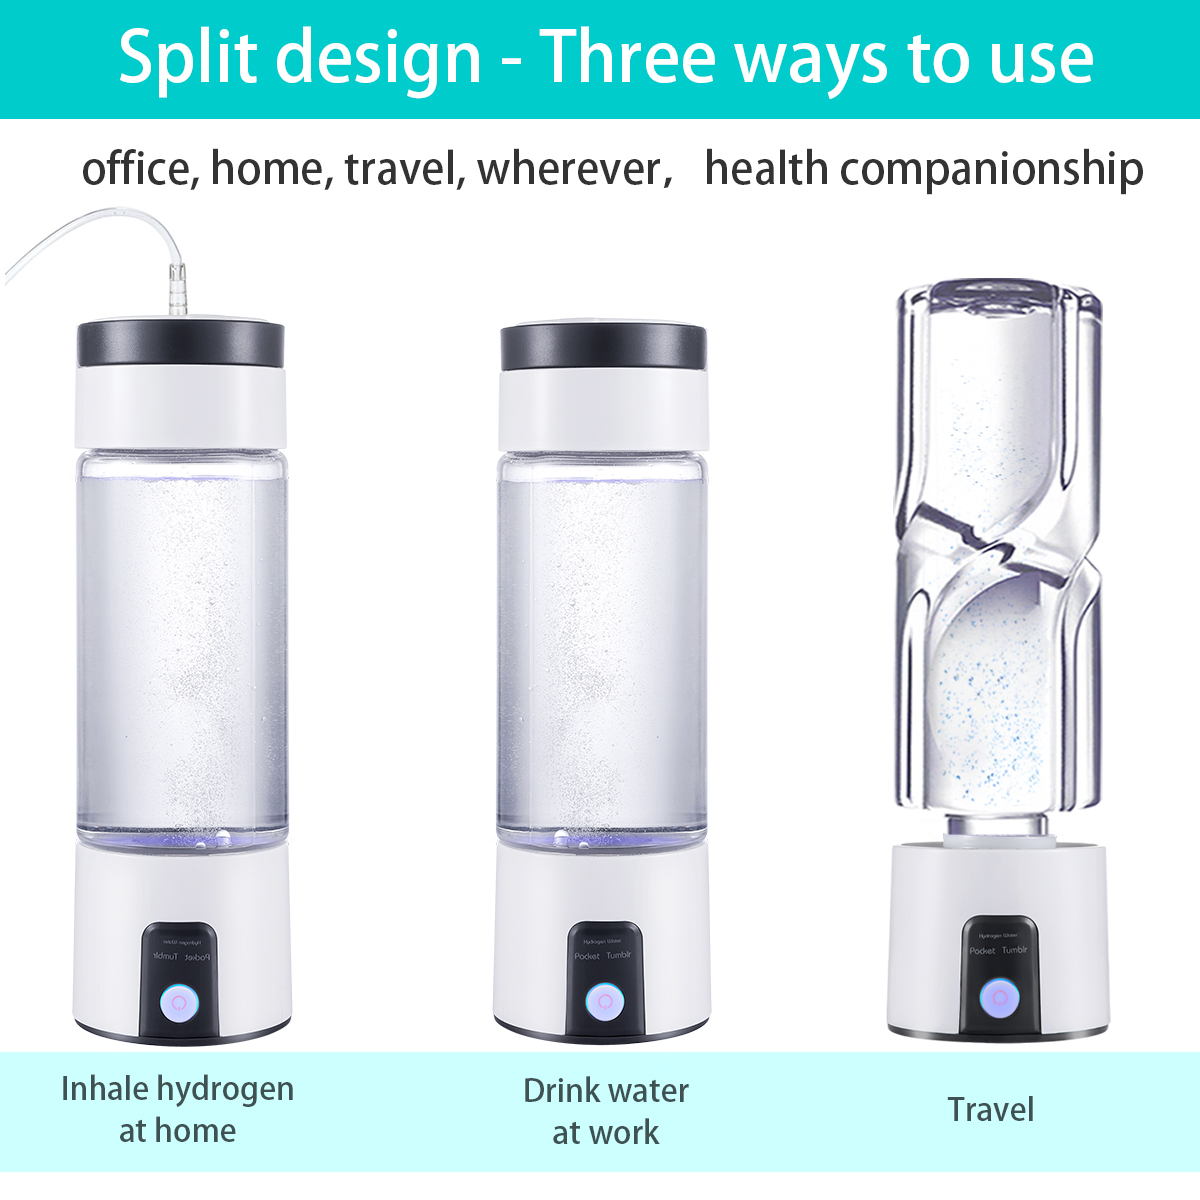 ALTHY H2-mini Hydrogen Water Generator Bottle Rich SPE PEM Maker lonizer Electrolysis Cup Portable USB Rechargeable Anti-Aging